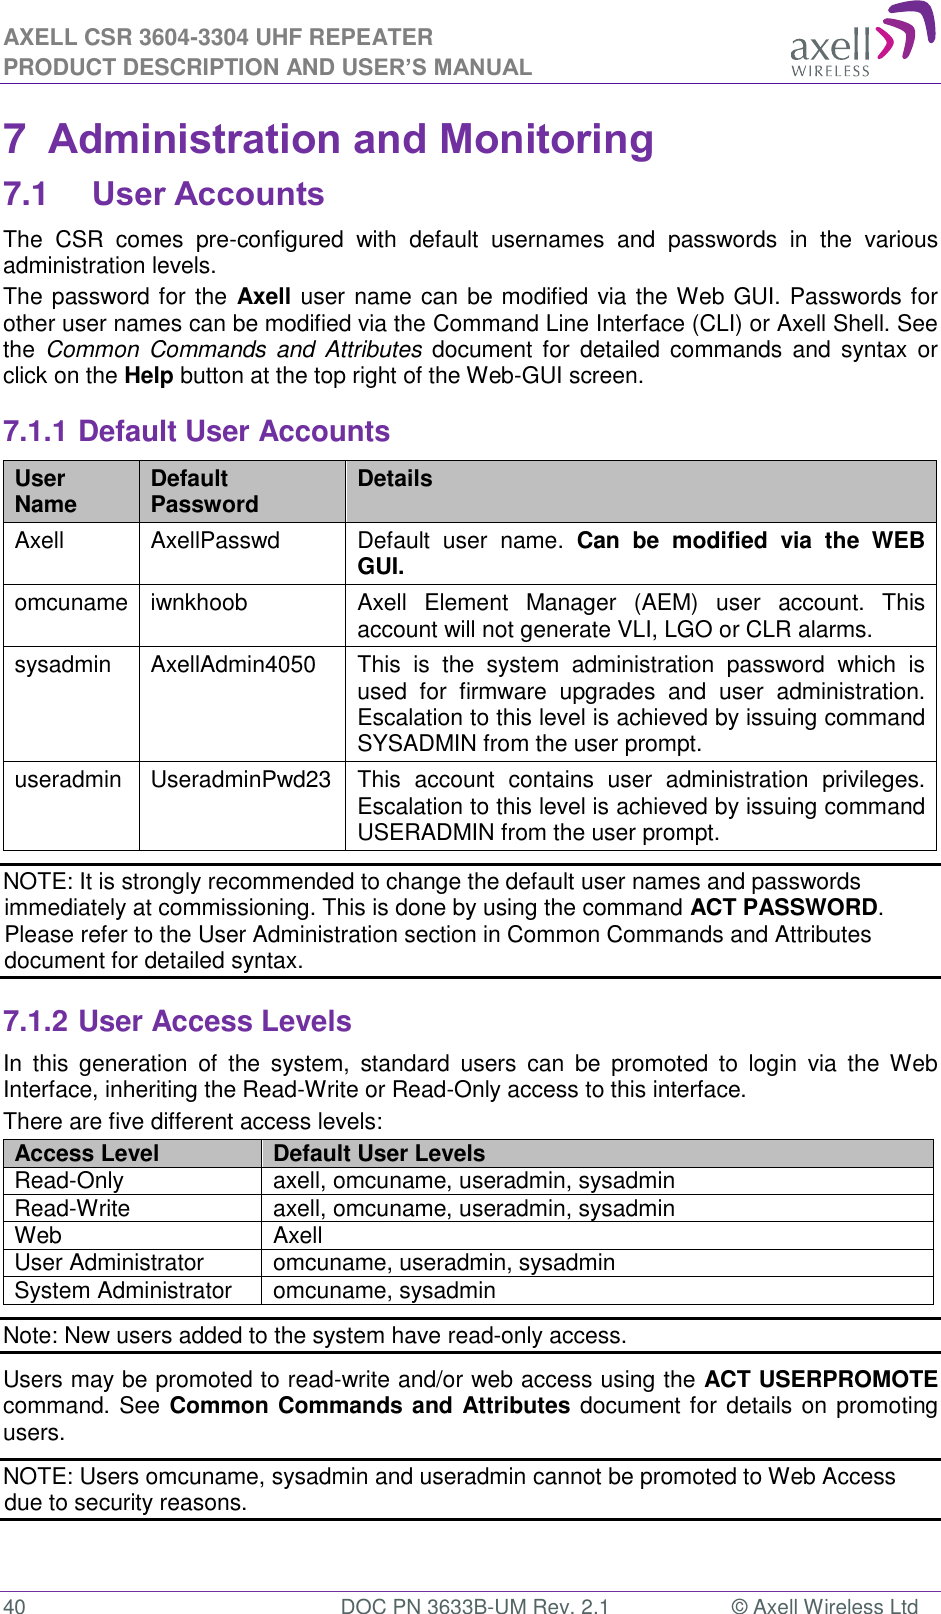 AXELL CSR 3604-3304 UHF REPEATER PRODUCT DESCRIPTION AND USER’S MANUAL  40  DOC PN 3633B-UM Rev. 2.1  © Axell Wireless Ltd  7  Administration and Monitoring 7.1 User Accounts The  CSR  comes  pre-configured  with  default  usernames  and  passwords  in  the  various administration levels. The password for the Axell user name can be modified via the Web GUI. Passwords for other user names can be modified via the Command Line Interface (CLI) or Axell Shell. See the  Common  Commands and  Attributes  document for  detailed commands and  syntax  or click on the Help button at the top right of the Web-GUI screen. 7.1.1 Default User Accounts User Name Default Password Details Axell AxellPasswd Default  user  name.  Can  be  modified  via  the  WEB GUI. omcuname iwnkhoob Axell  Element  Manager  (AEM)  user  account.  This account will not generate VLI, LGO or CLR alarms. sysadmin AxellAdmin4050 This  is  the  system  administration  password  which  is used  for  firmware  upgrades  and  user  administration. Escalation to this level is achieved by issuing command SYSADMIN from the user prompt. useradmin UseradminPwd23 This  account  contains  user  administration  privileges. Escalation to this level is achieved by issuing command USERADMIN from the user prompt. NOTE: It is strongly recommended to change the default user names and passwords immediately at commissioning. This is done by using the command ACT PASSWORD. Please refer to the User Administration section in Common Commands and Attributes document for detailed syntax. 7.1.2 User Access Levels In  this  generation  of  the  system,  standard  users  can  be  promoted  to  login  via  the  Web Interface, inheriting the Read-Write or Read-Only access to this interface. There are five different access levels: Access Level Default User Levels Read-Only axell, omcuname, useradmin, sysadmin Read-Write axell, omcuname, useradmin, sysadmin Web Axell User Administrator omcuname, useradmin, sysadmin System Administrator omcuname, sysadmin Note: New users added to the system have read-only access. Users may be promoted to read-write and/or web access using the ACT USERPROMOTE command. See Common Commands and Attributes document for details on promoting users. NOTE: Users omcuname, sysadmin and useradmin cannot be promoted to Web Access due to security reasons. 